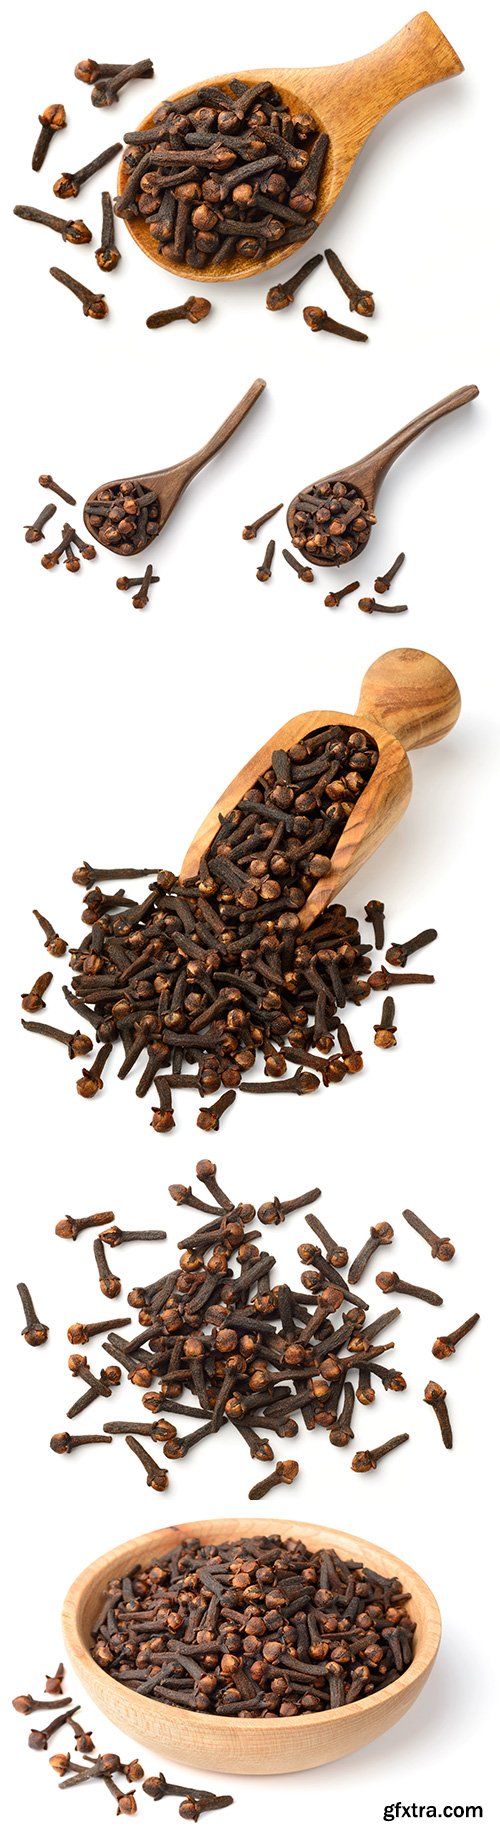 Dried Cloves Isolated - 6xJPGs